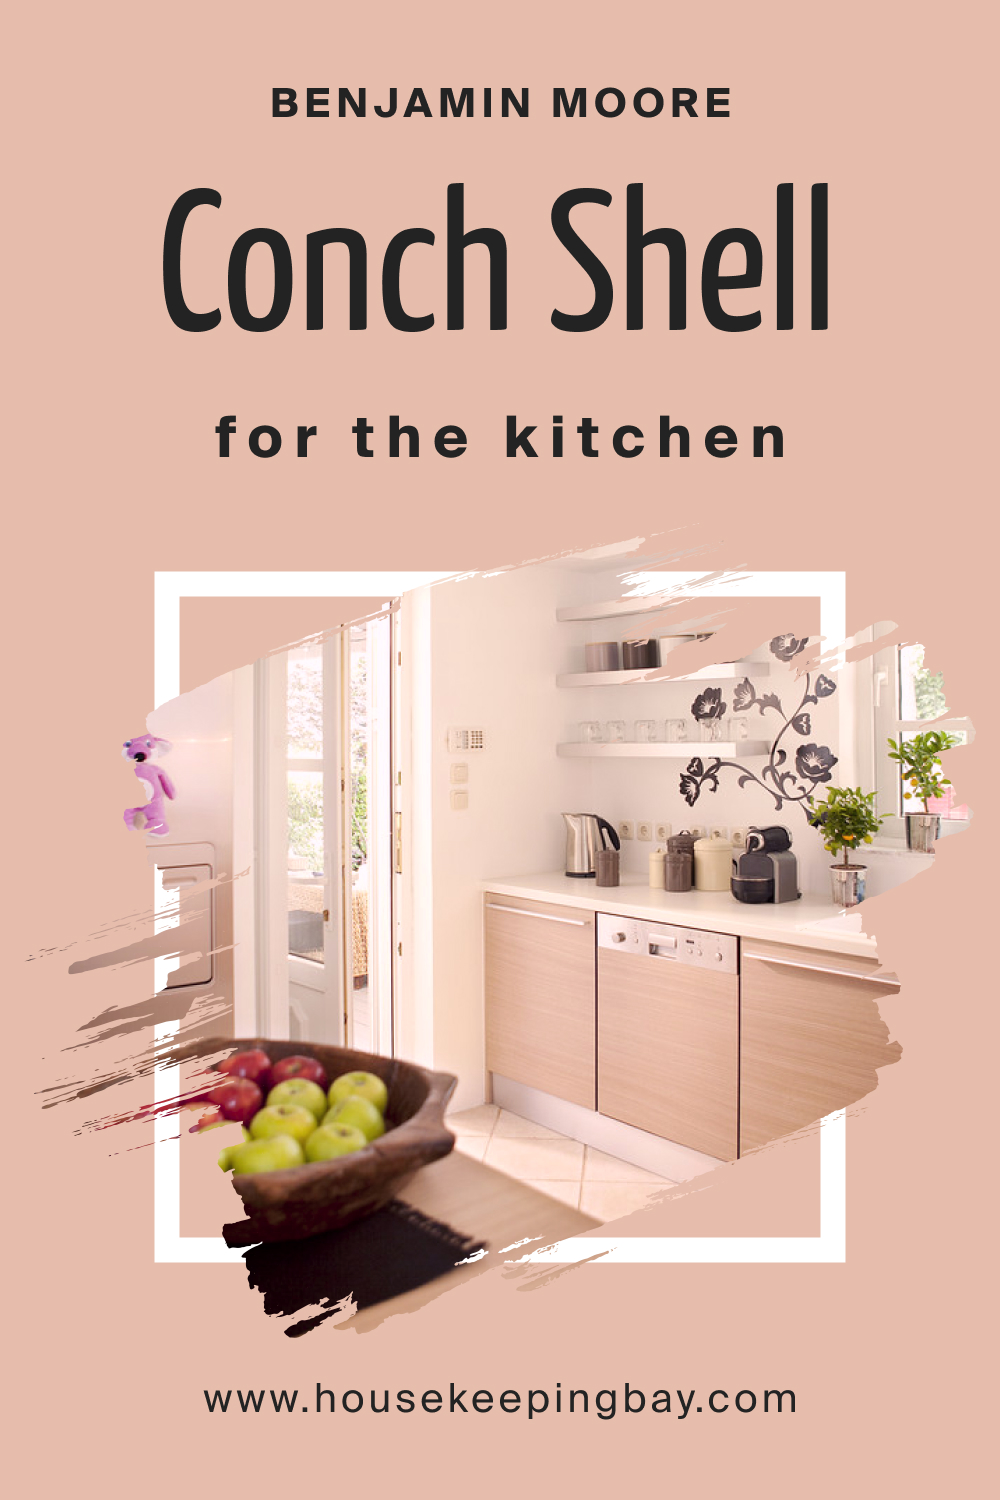 Benjamin Moore. Conch Shell 052 for the Kitchen